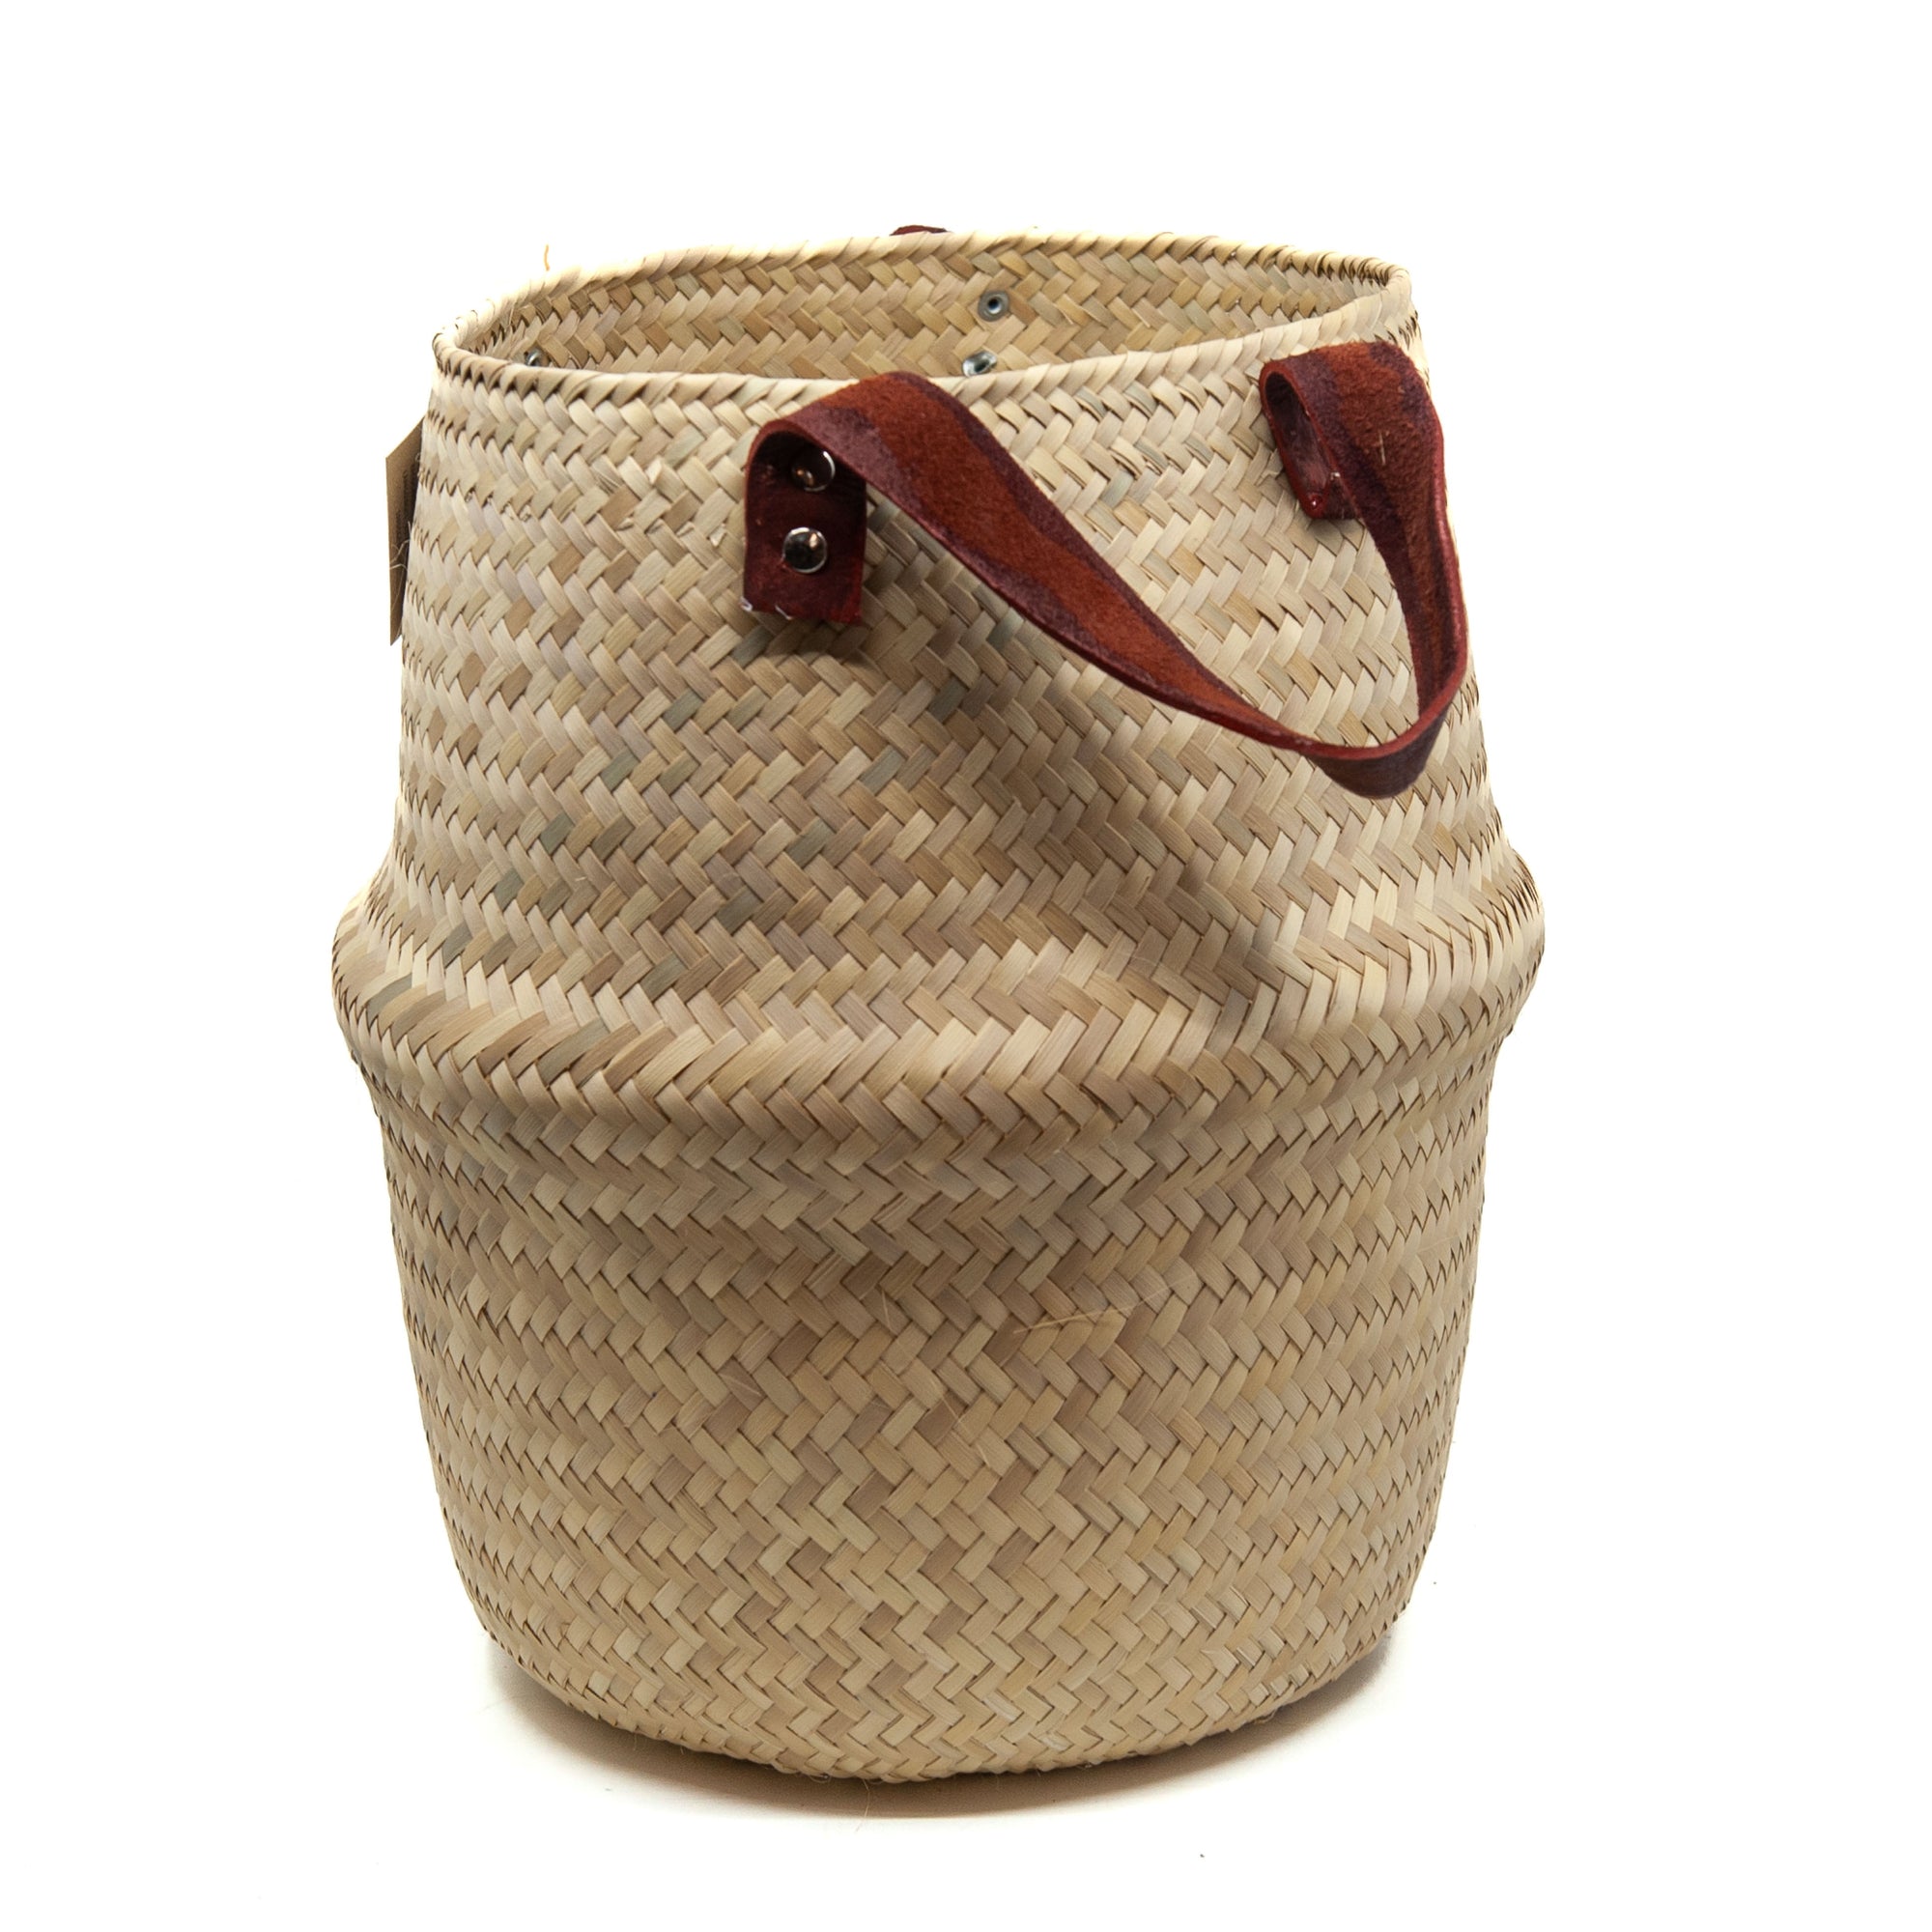 Handwoven Palm Basket with Leather Handles - Natural